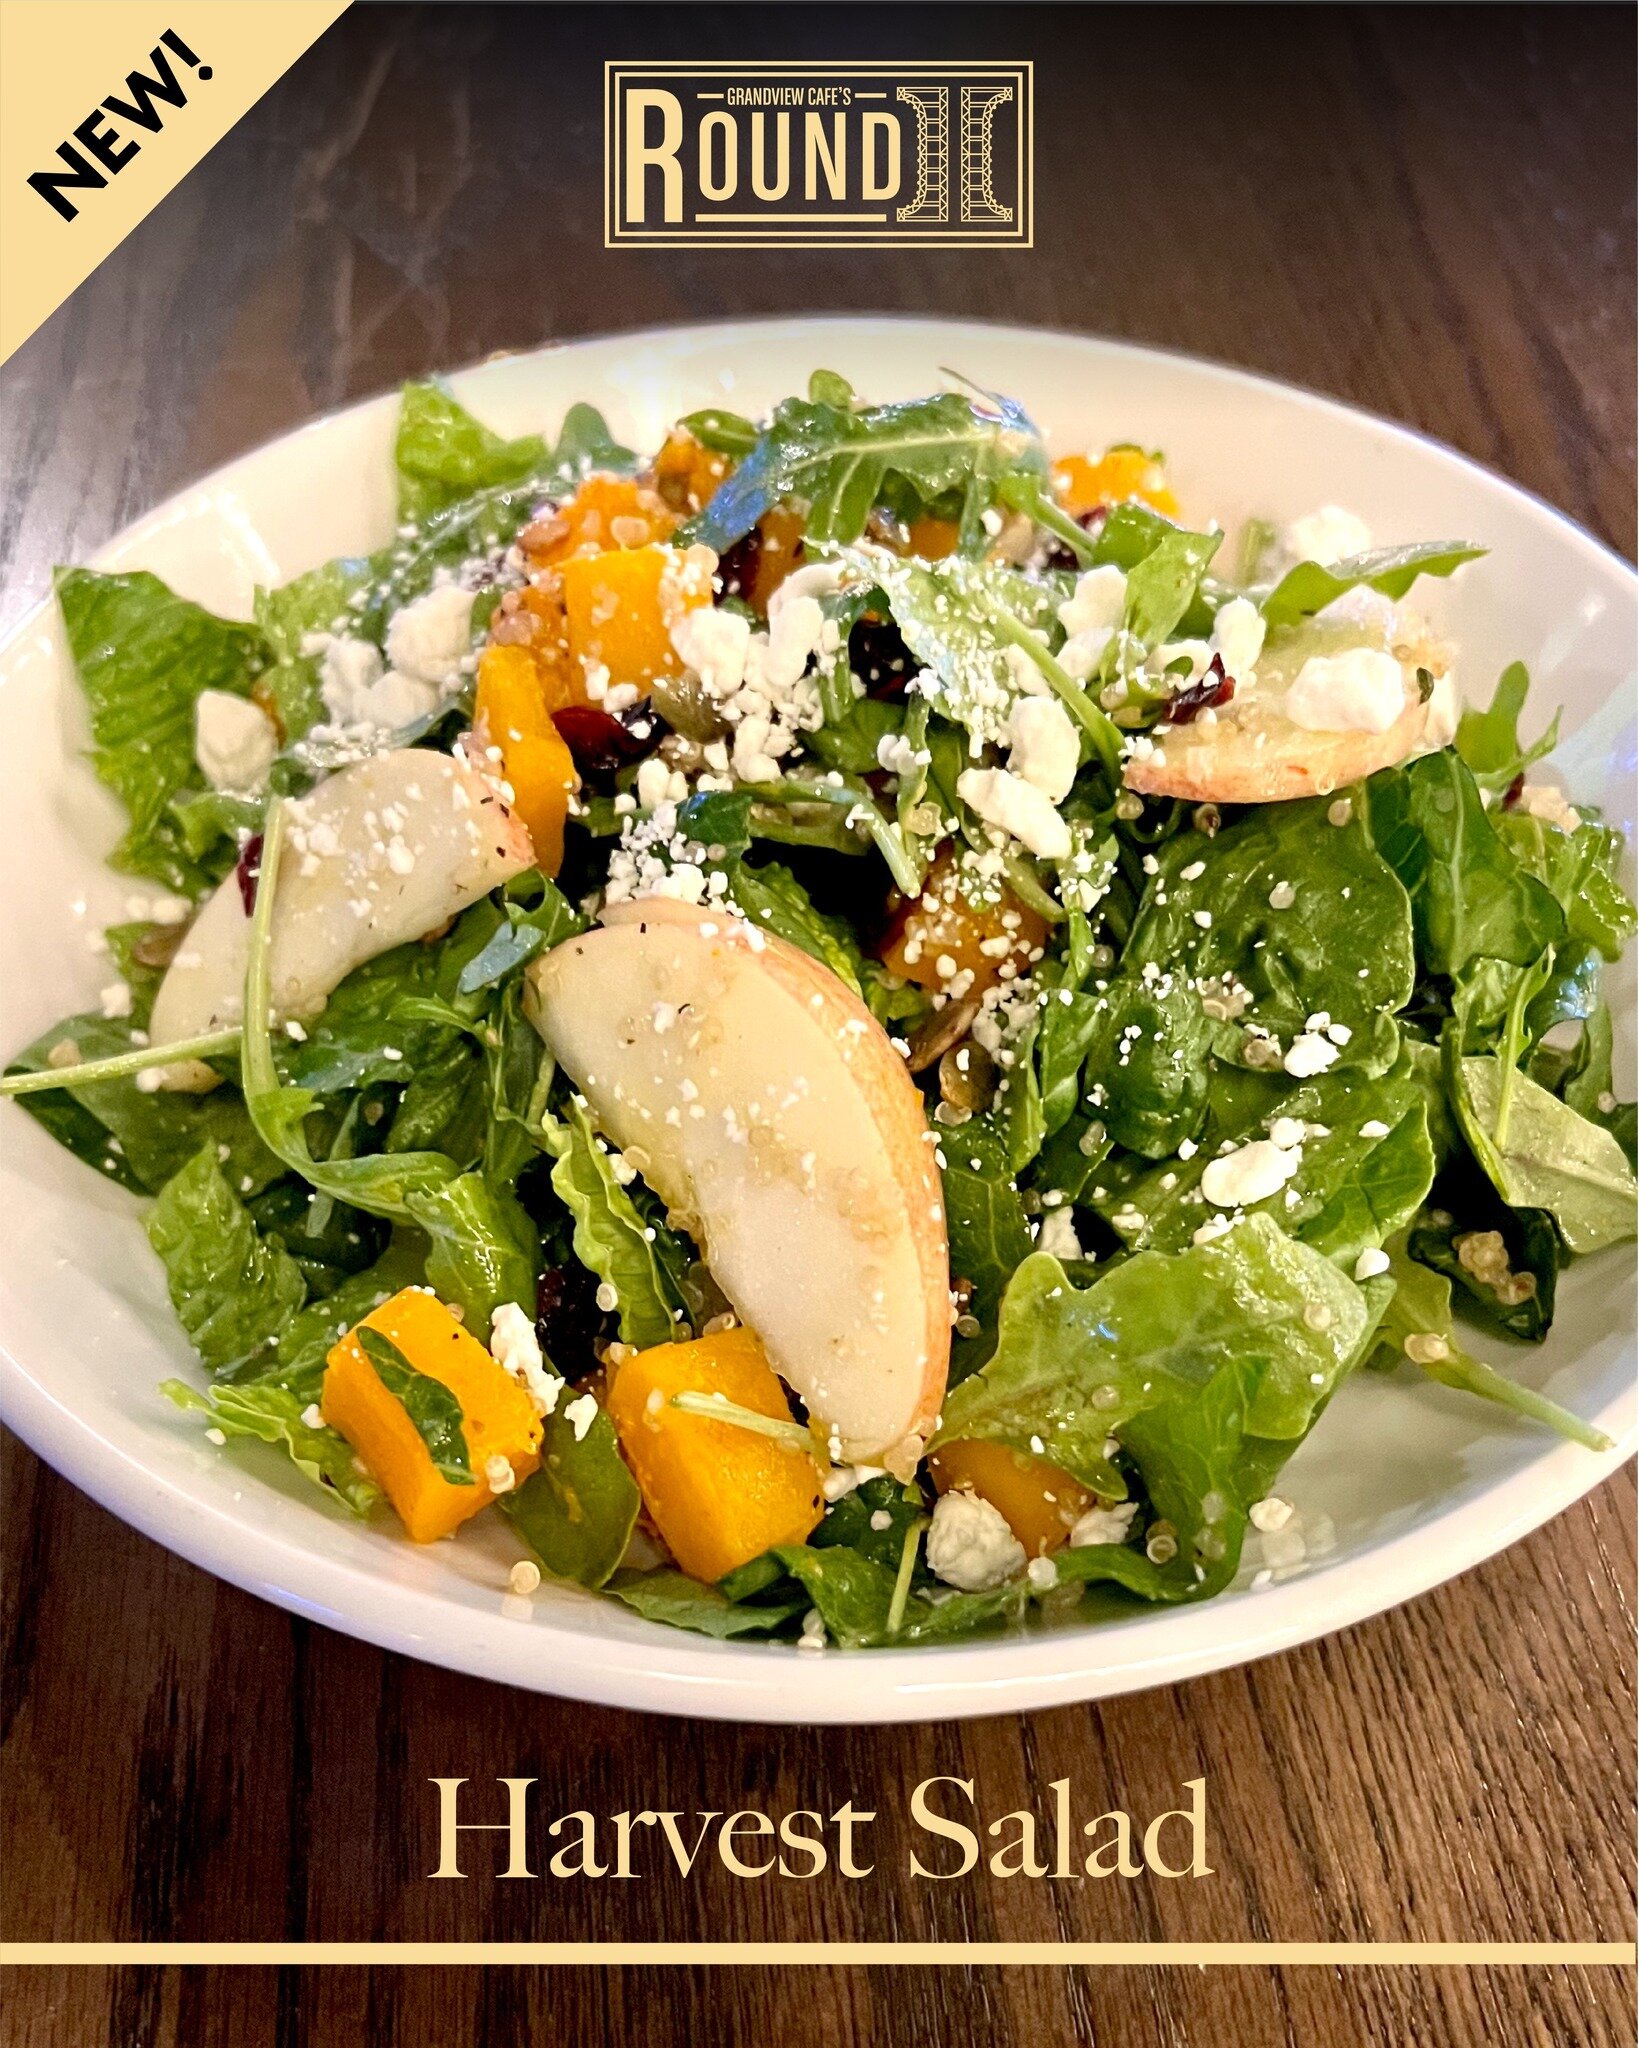 NEW: HARVEST SALAD | Our delicious new harvest salad features mixed lettuces, roasted butternut, quinoa, apple, dried cranberries, goat cheese, spiced pepitas &amp;lemon vinaigrette.

#newmenu #freshtake #comingsoon #cafesround2 #grandviewcafe #grand